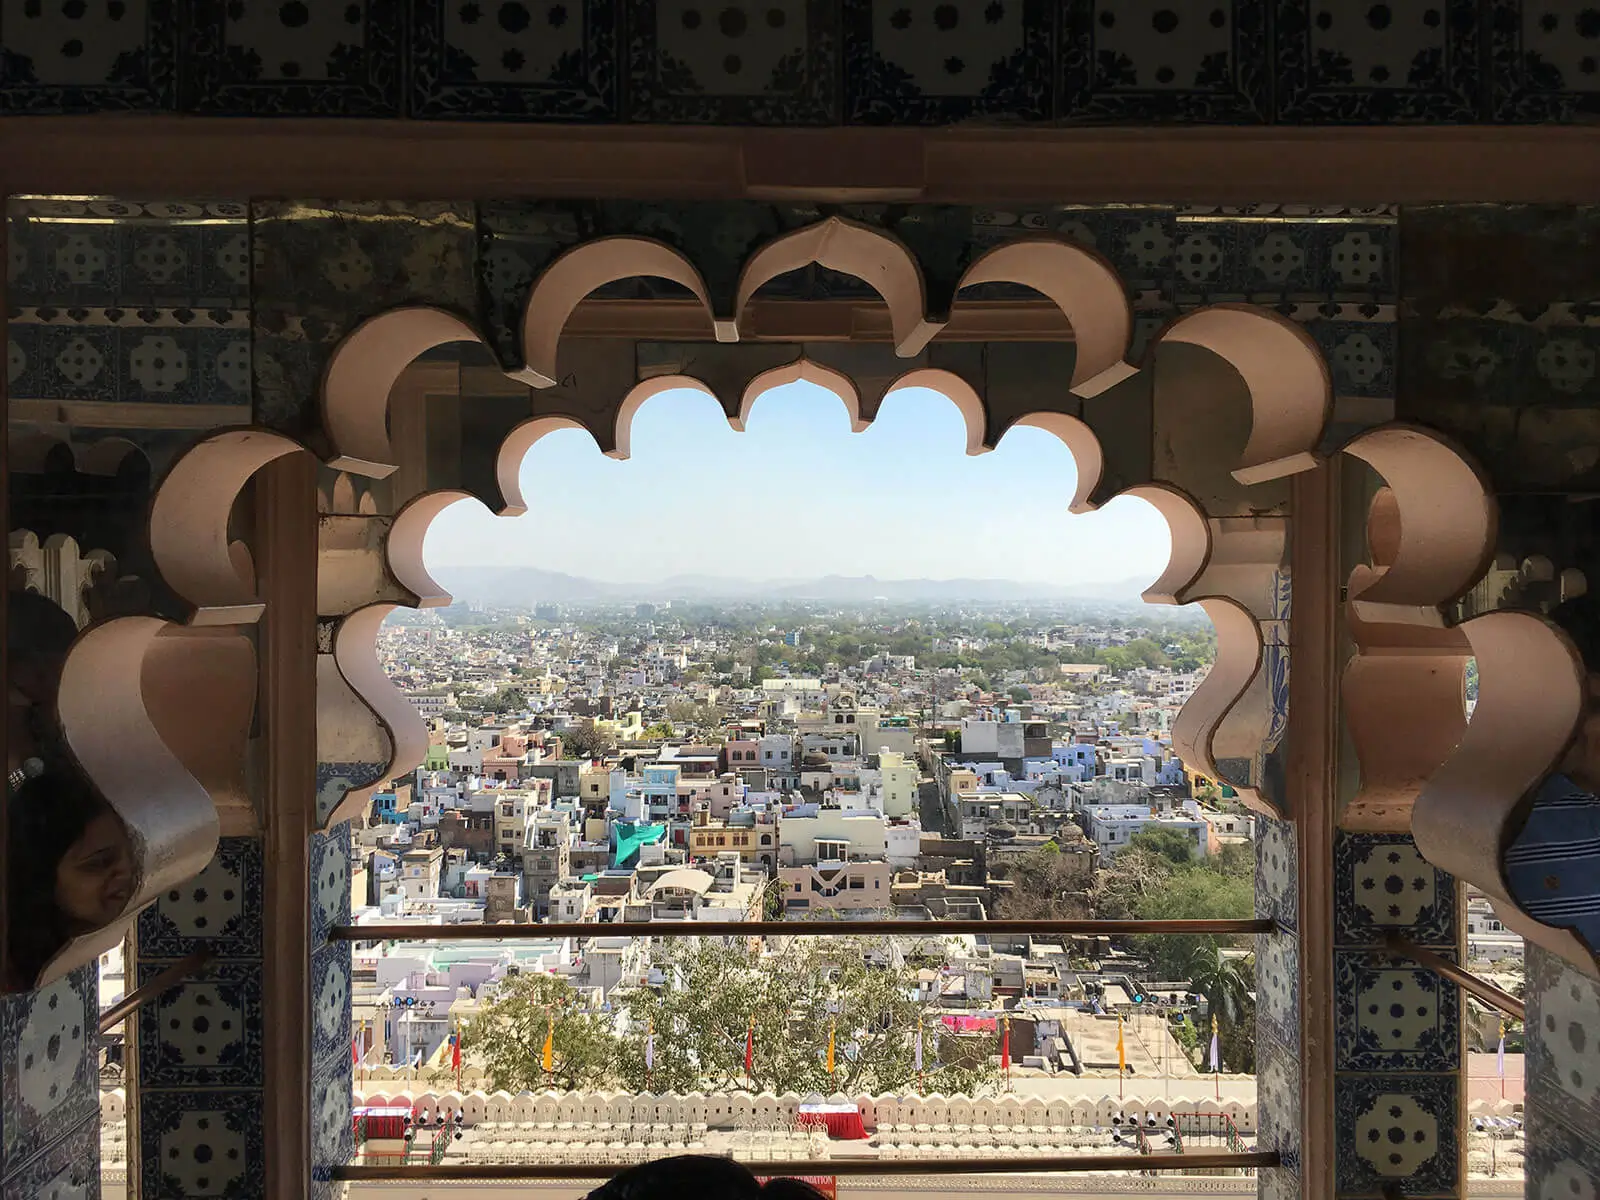 Looking out from a balcony to an indian city below